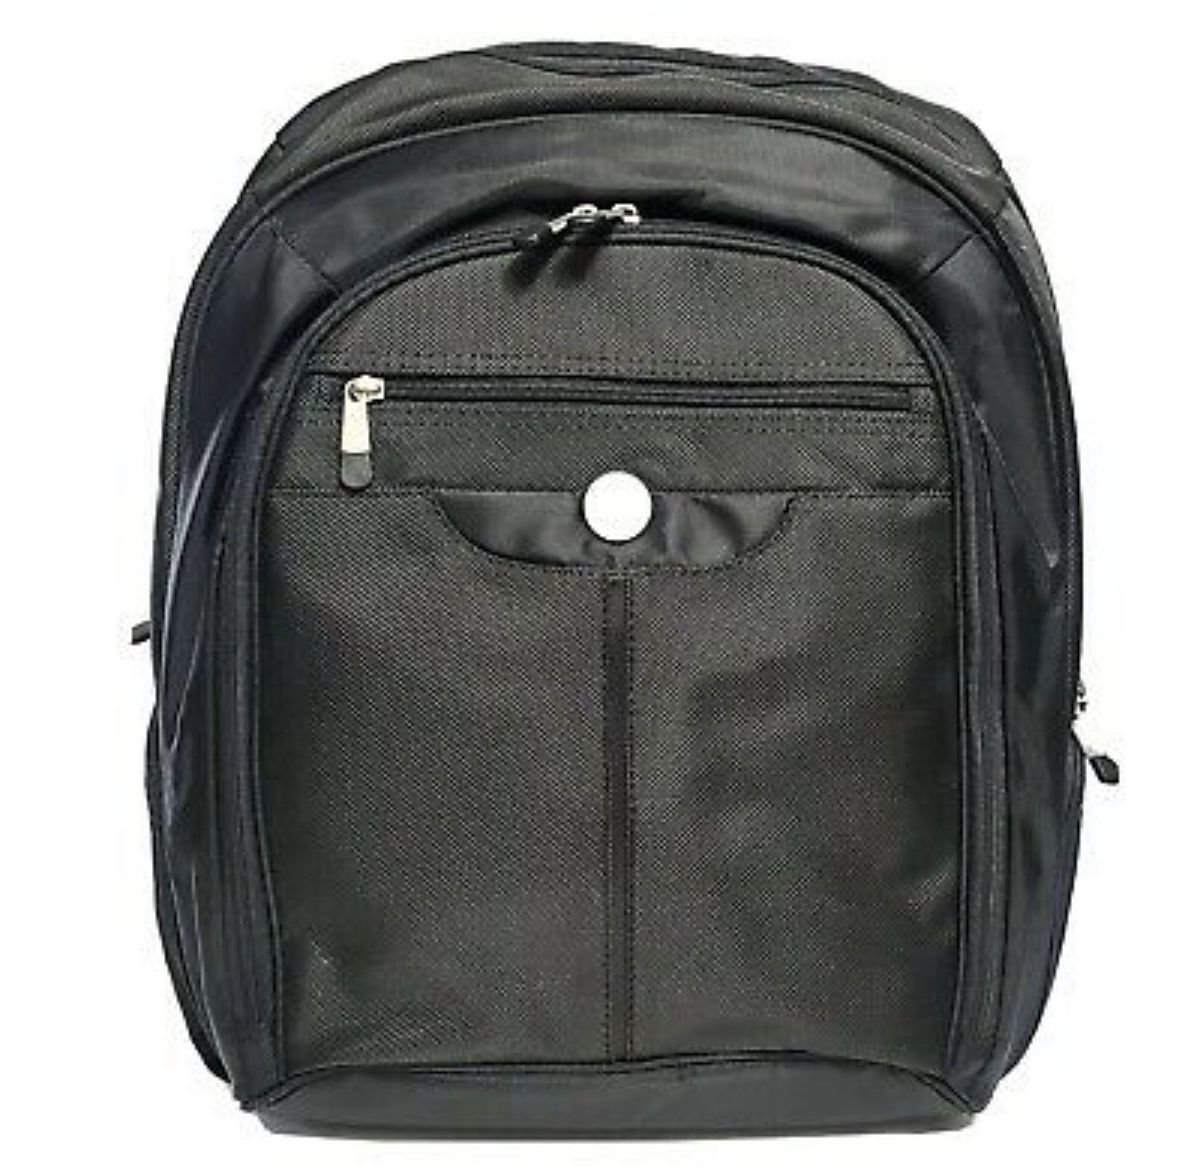 New Dell Black Large Nylon Backpack for 17 inch Laptop